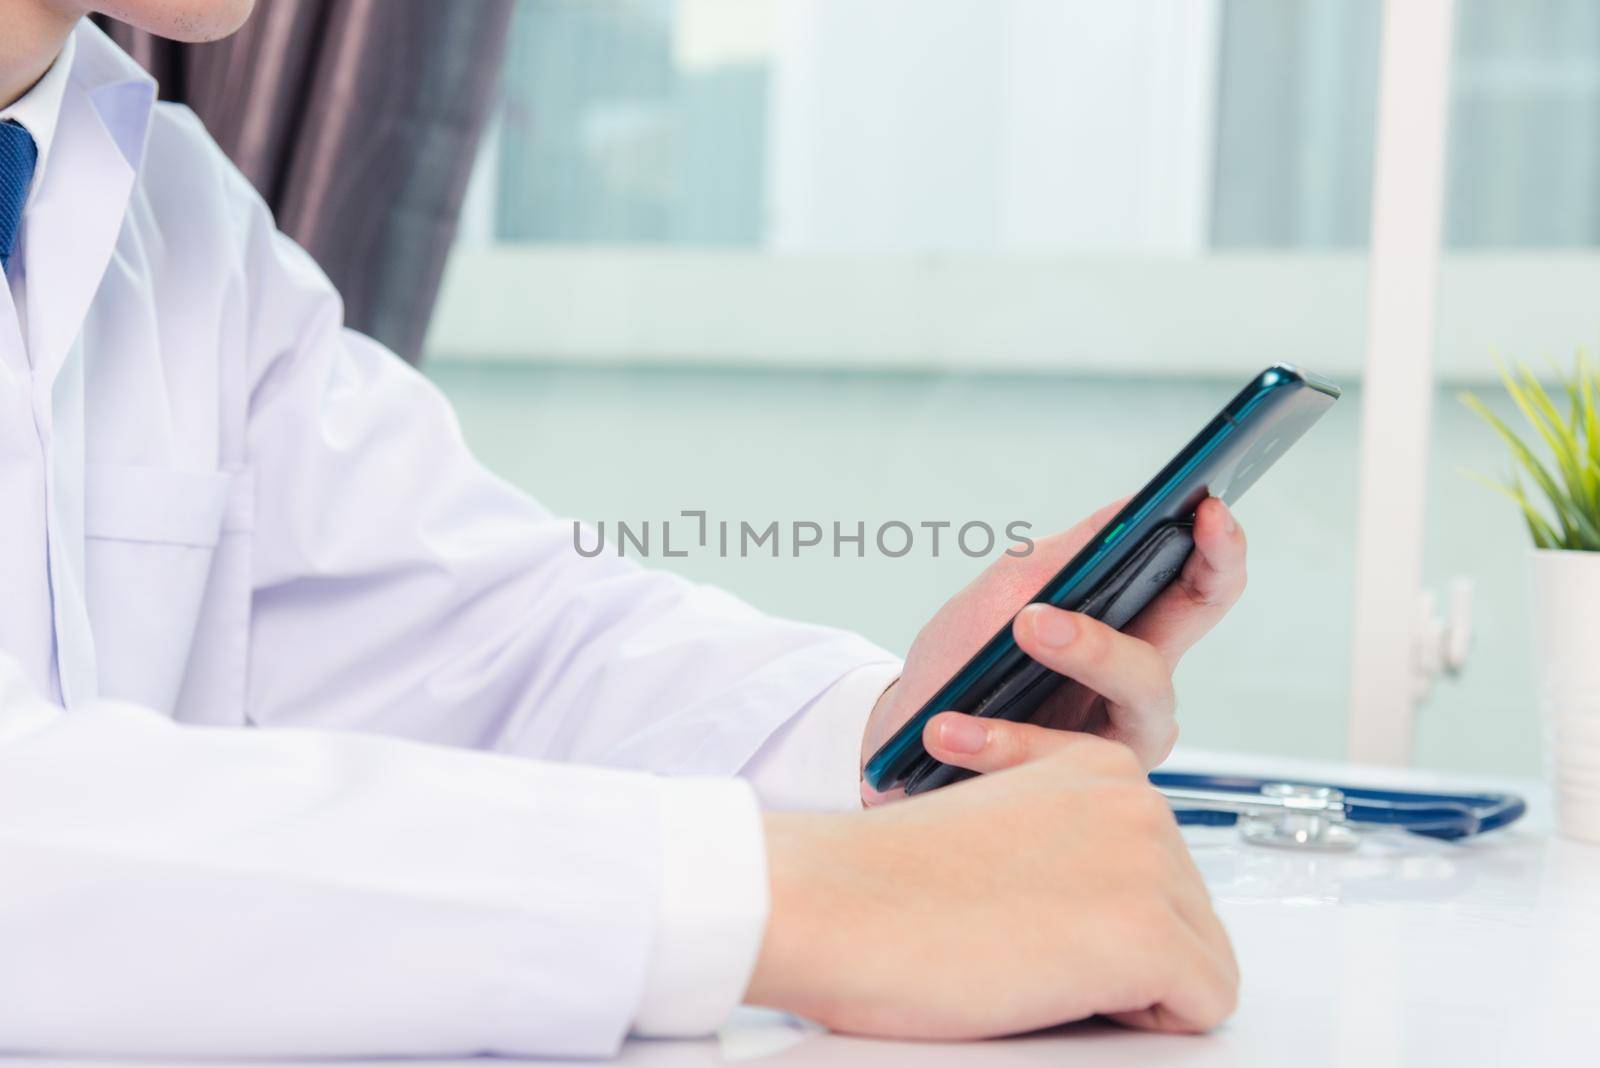 Asian doctor young handsome man smiling using working or holding with digital smart mobile phone at hospital desk office, Technology healthcare medical concept